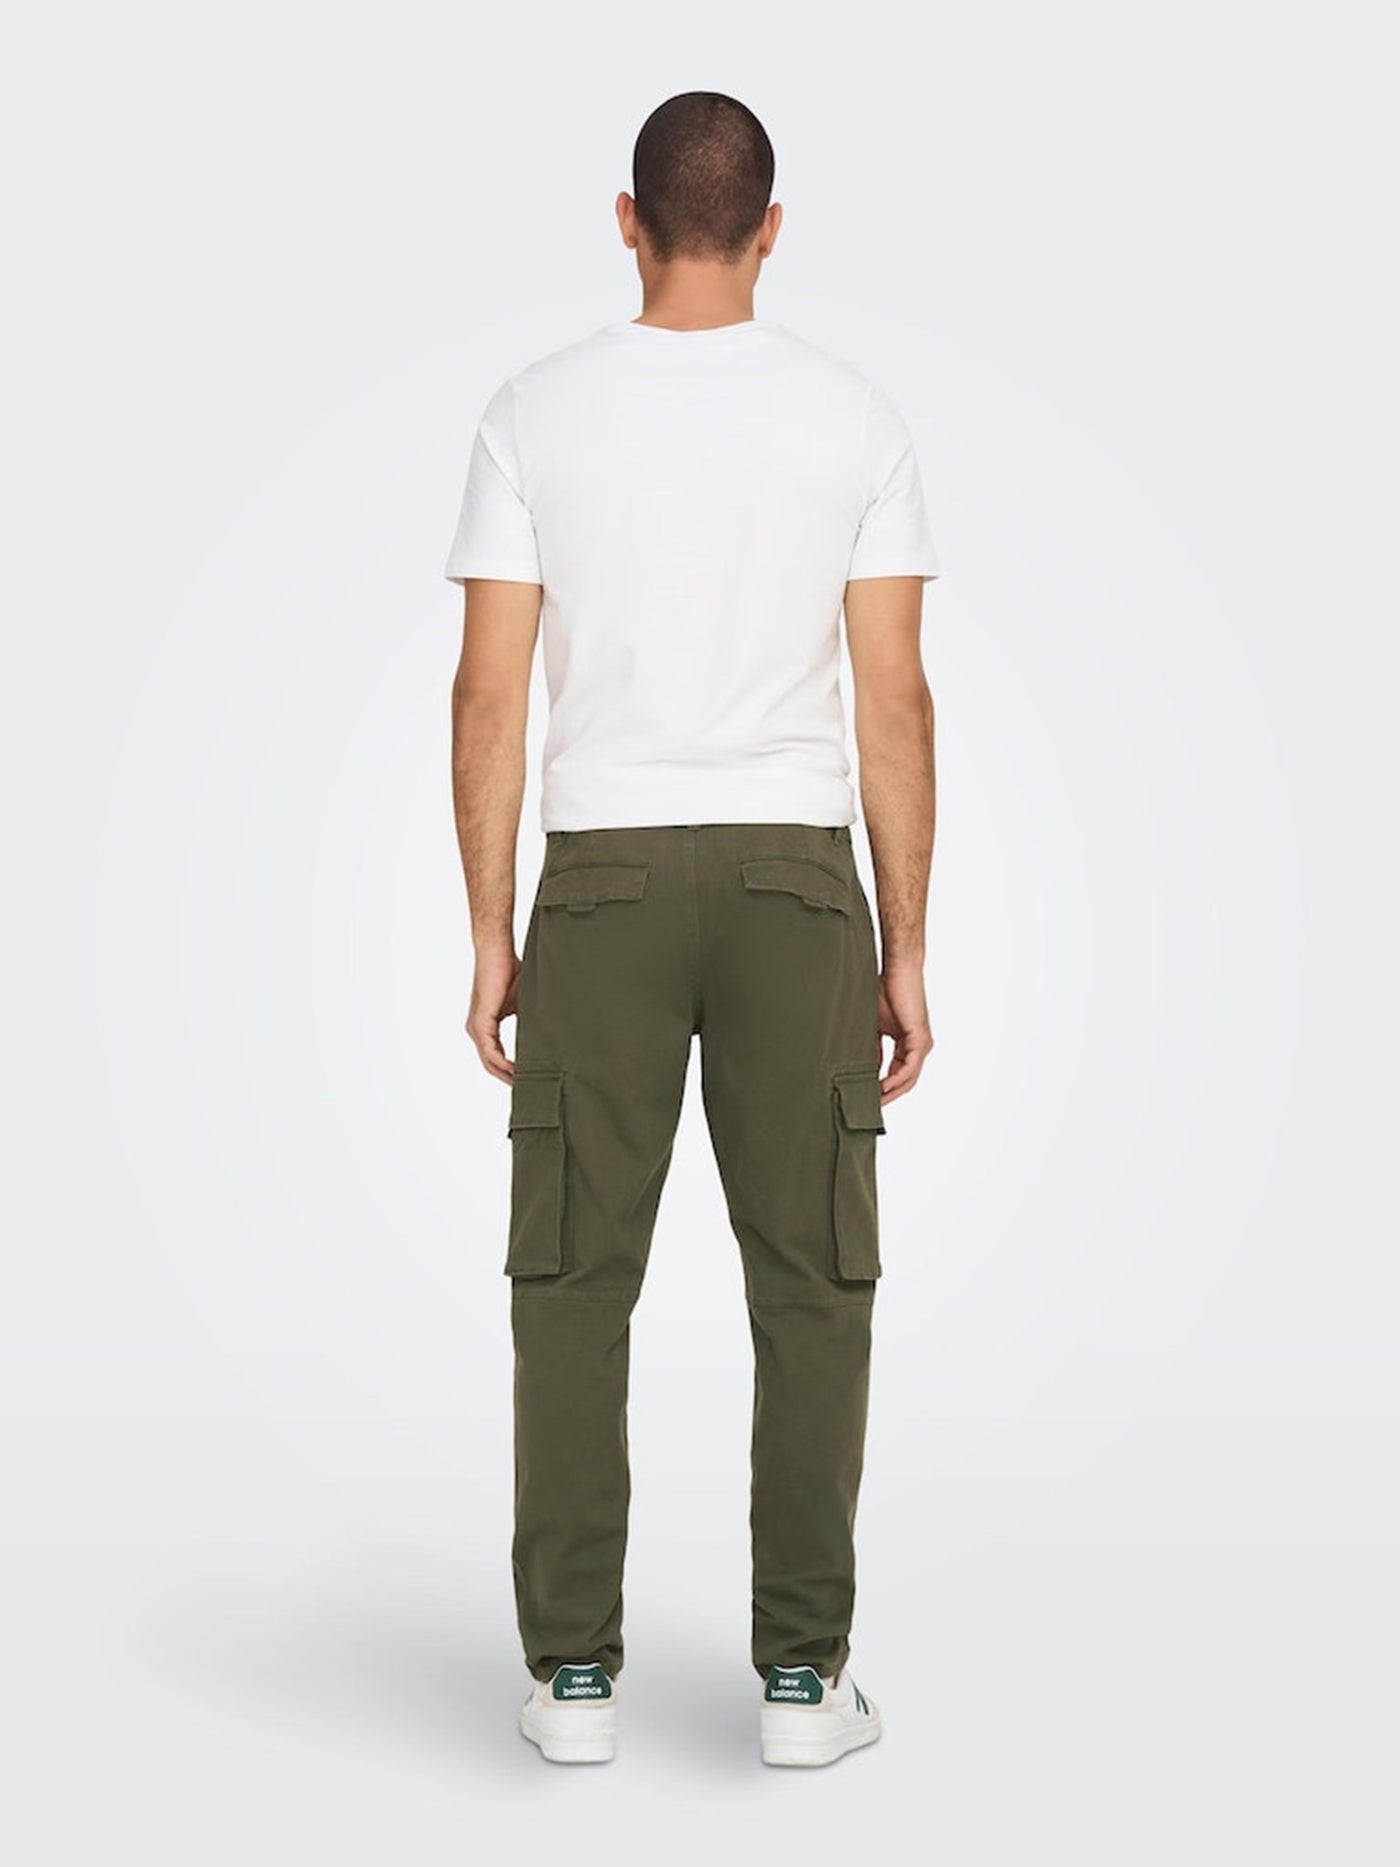 Next Cargo Pants - Olive Night - Only & Sons - Grøn 3